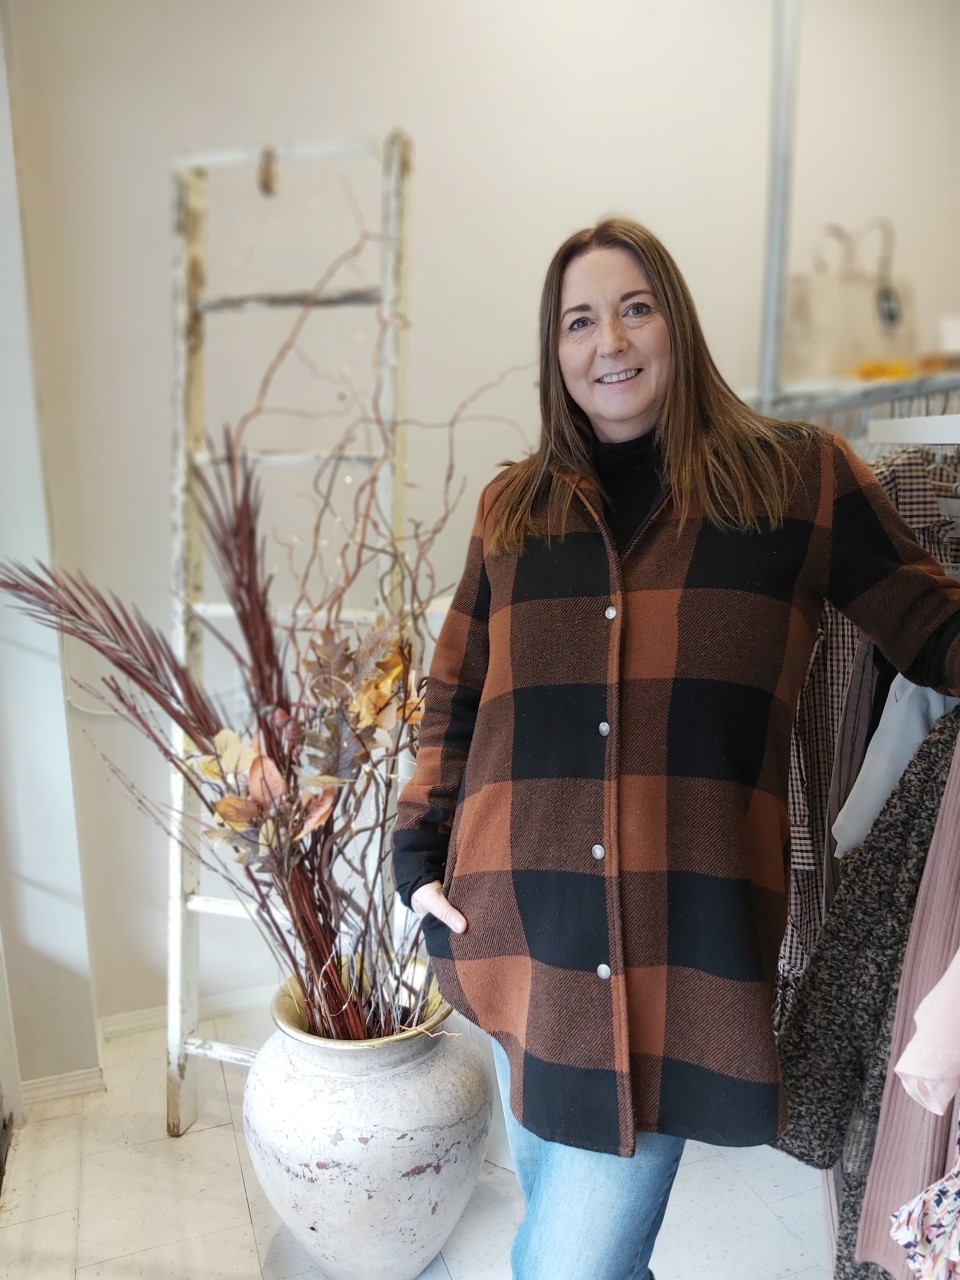 Business owner Lois Chadburn says she's been overwhelmed by community support after she helped a stranger get to a wedding in Hope, B.C. on Fri. Sept. 24, 2021. Chadburn is seen here at her shop, Lolly's Fashion Lounge, in downtown Chilliwack, B.C.